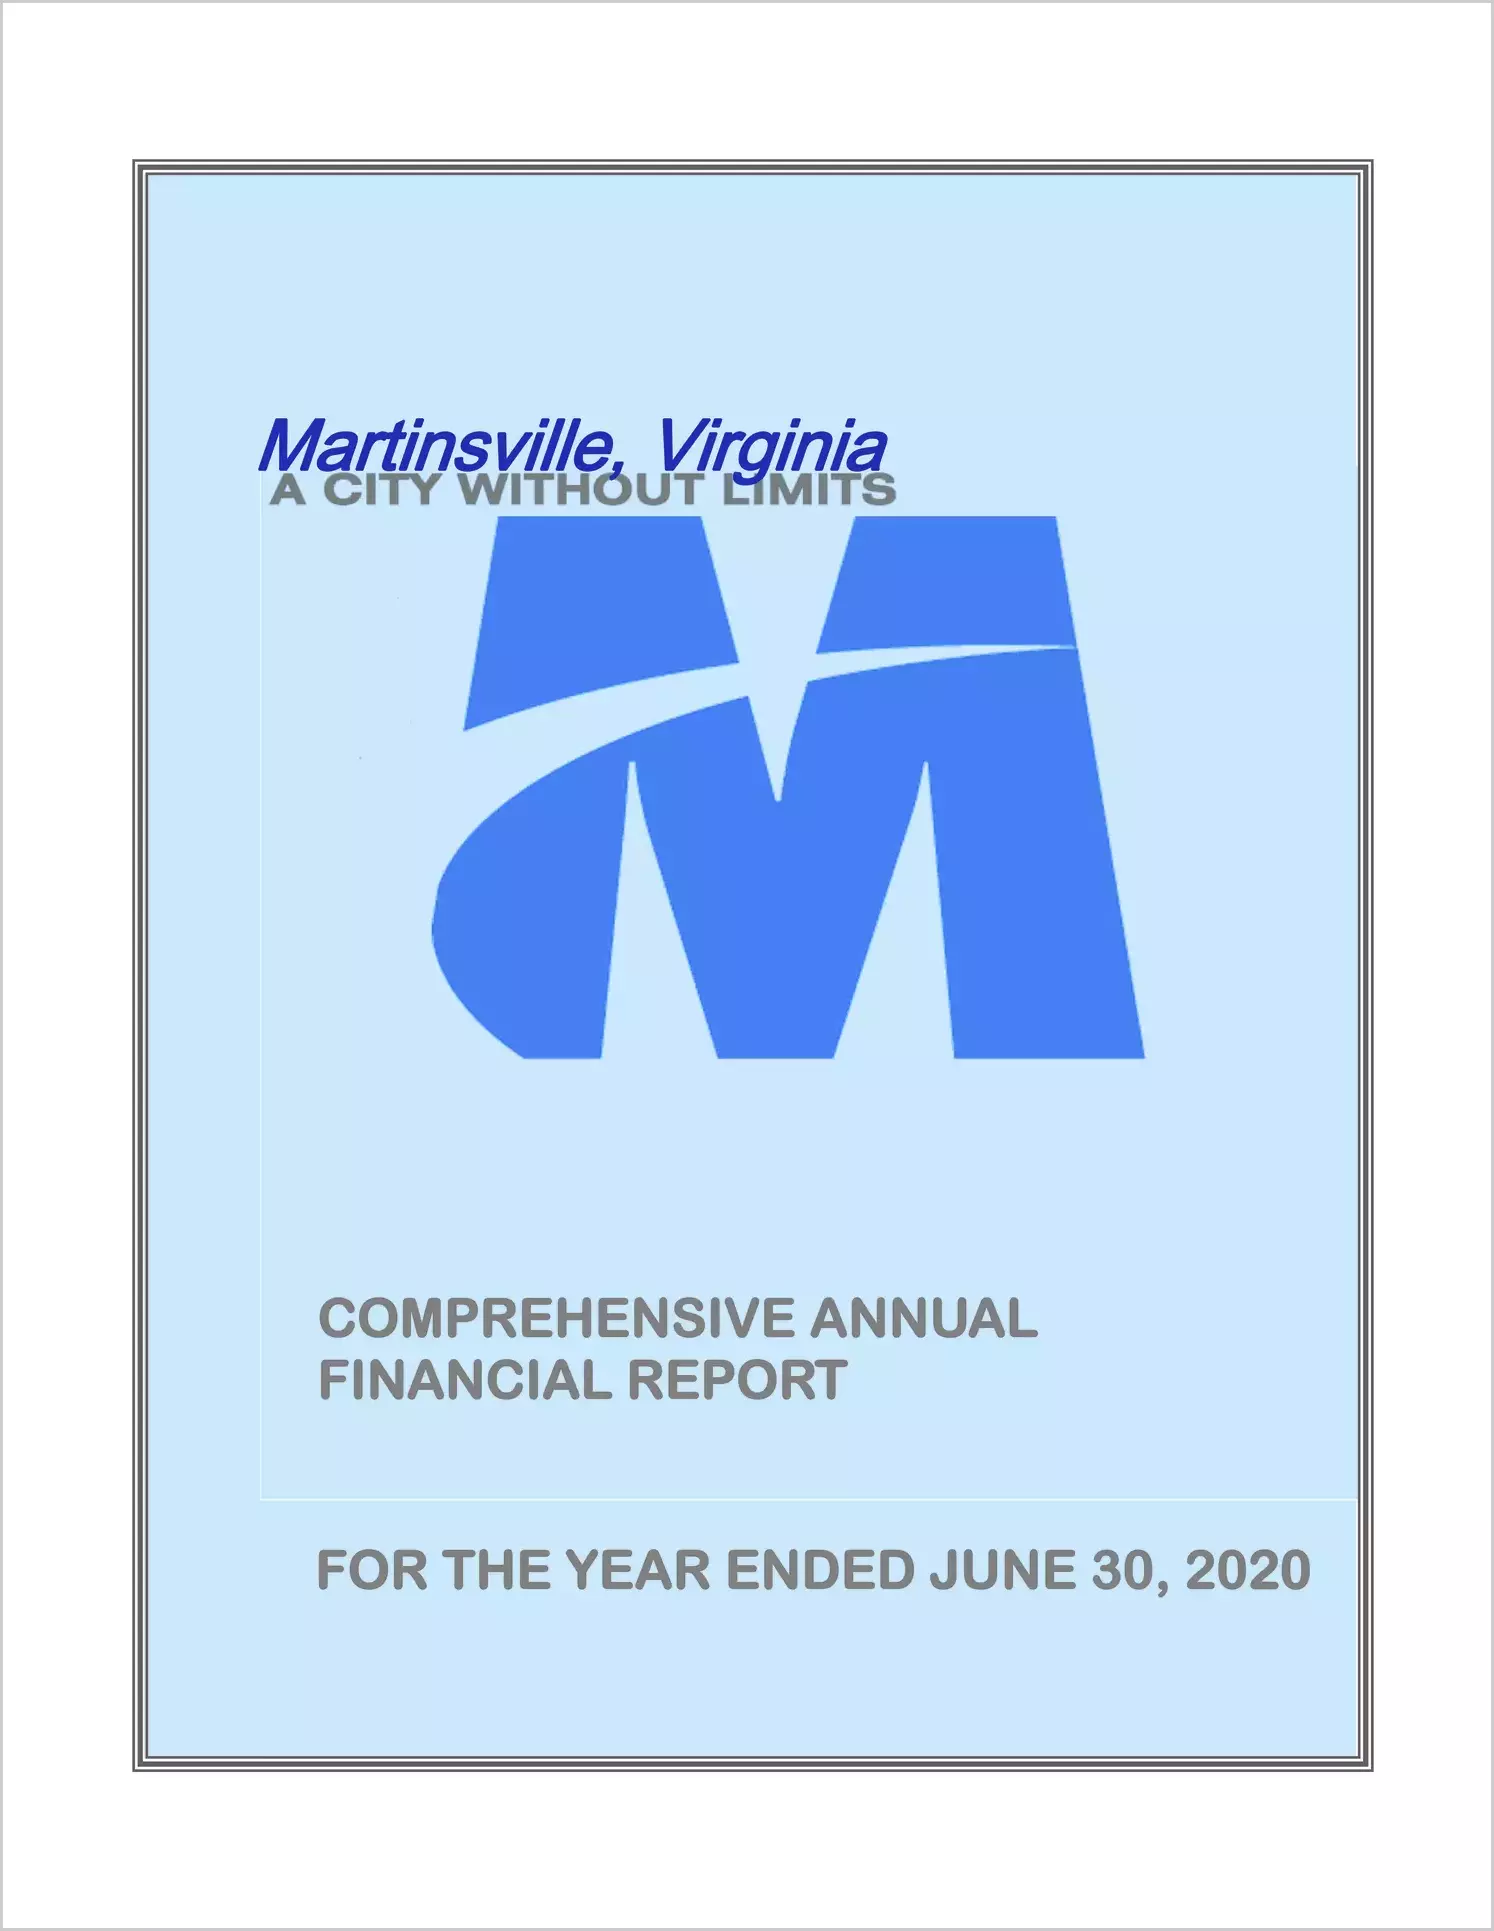 2020 Annual Financial Report for City of Martinsville